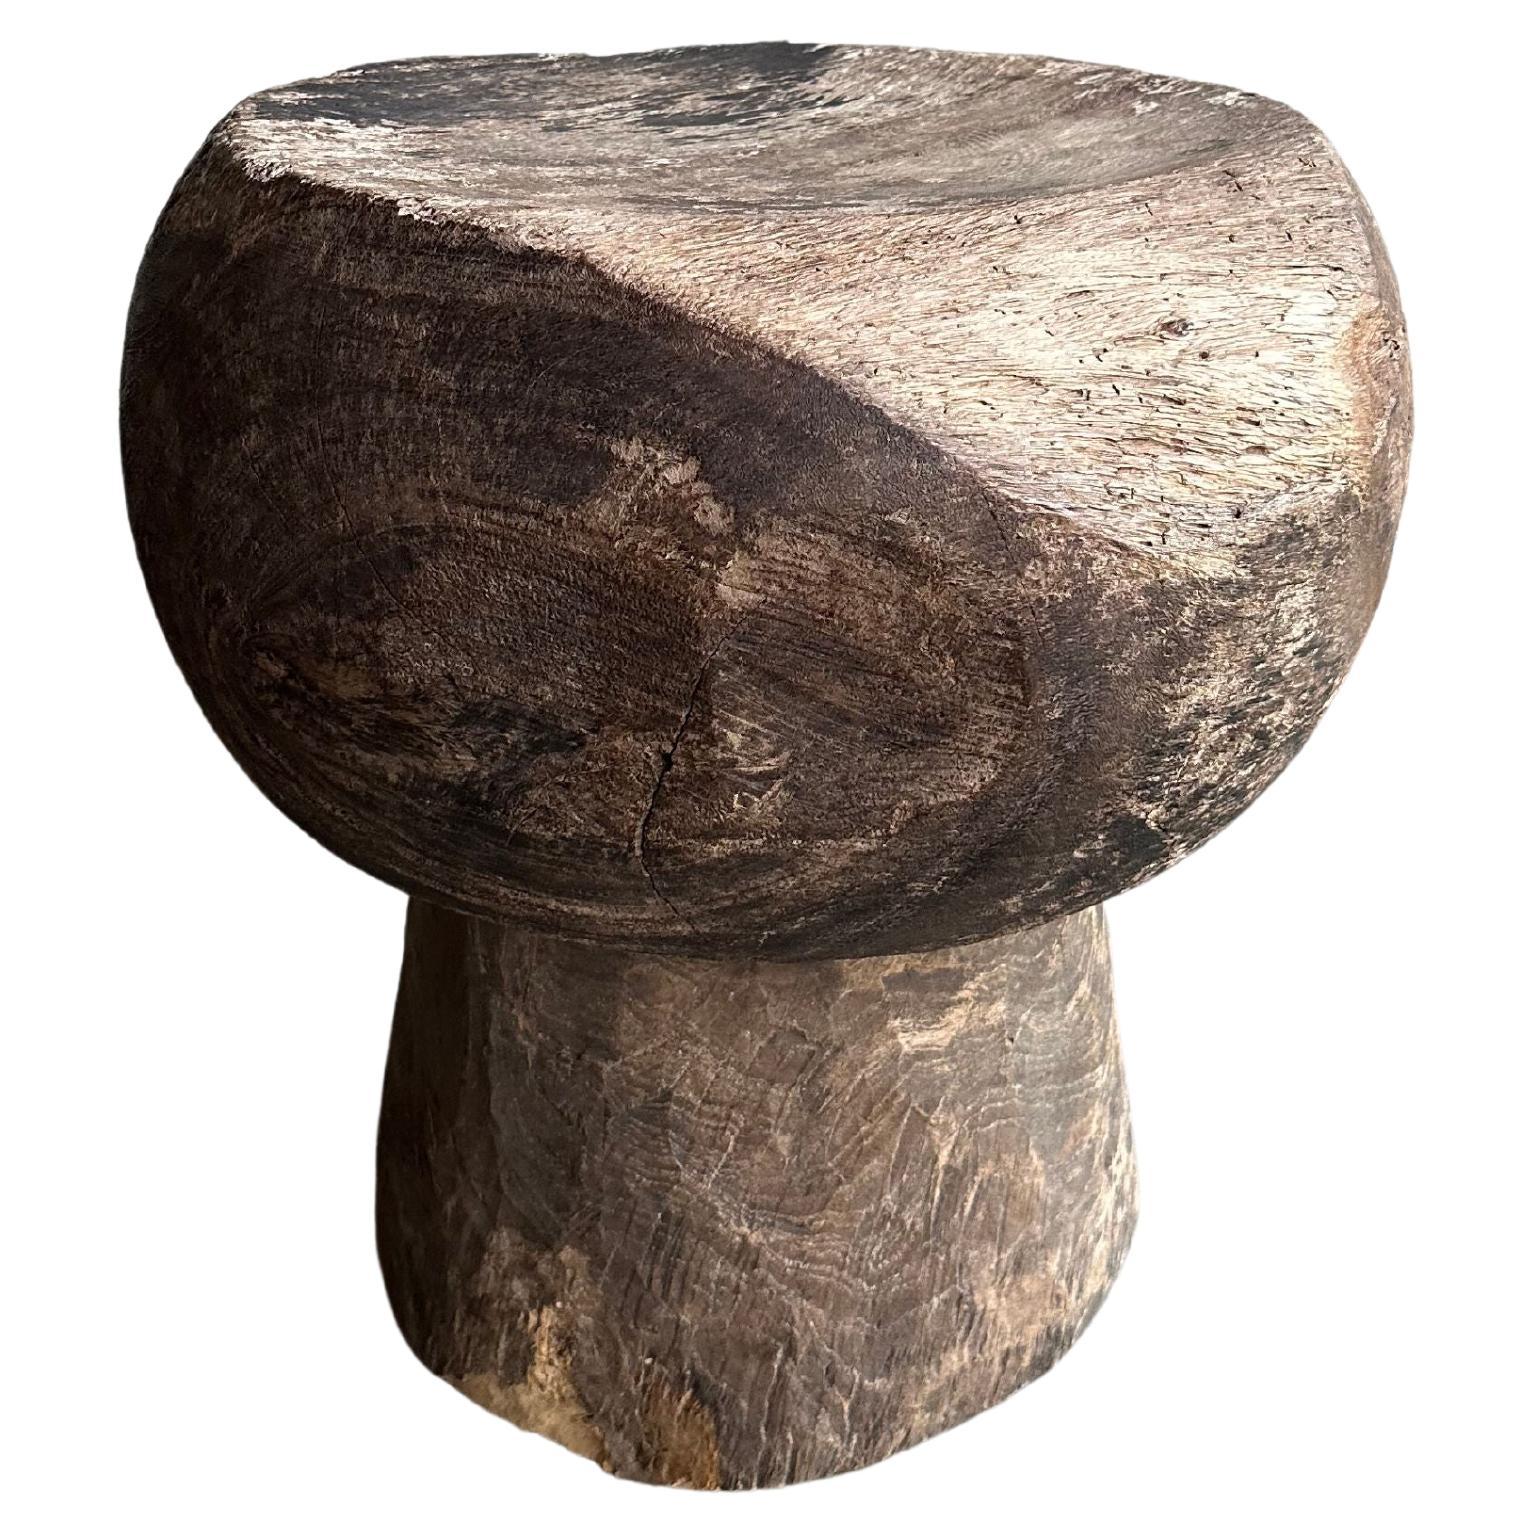 Suar Wood Stool From Java, Modern Organic For Sale